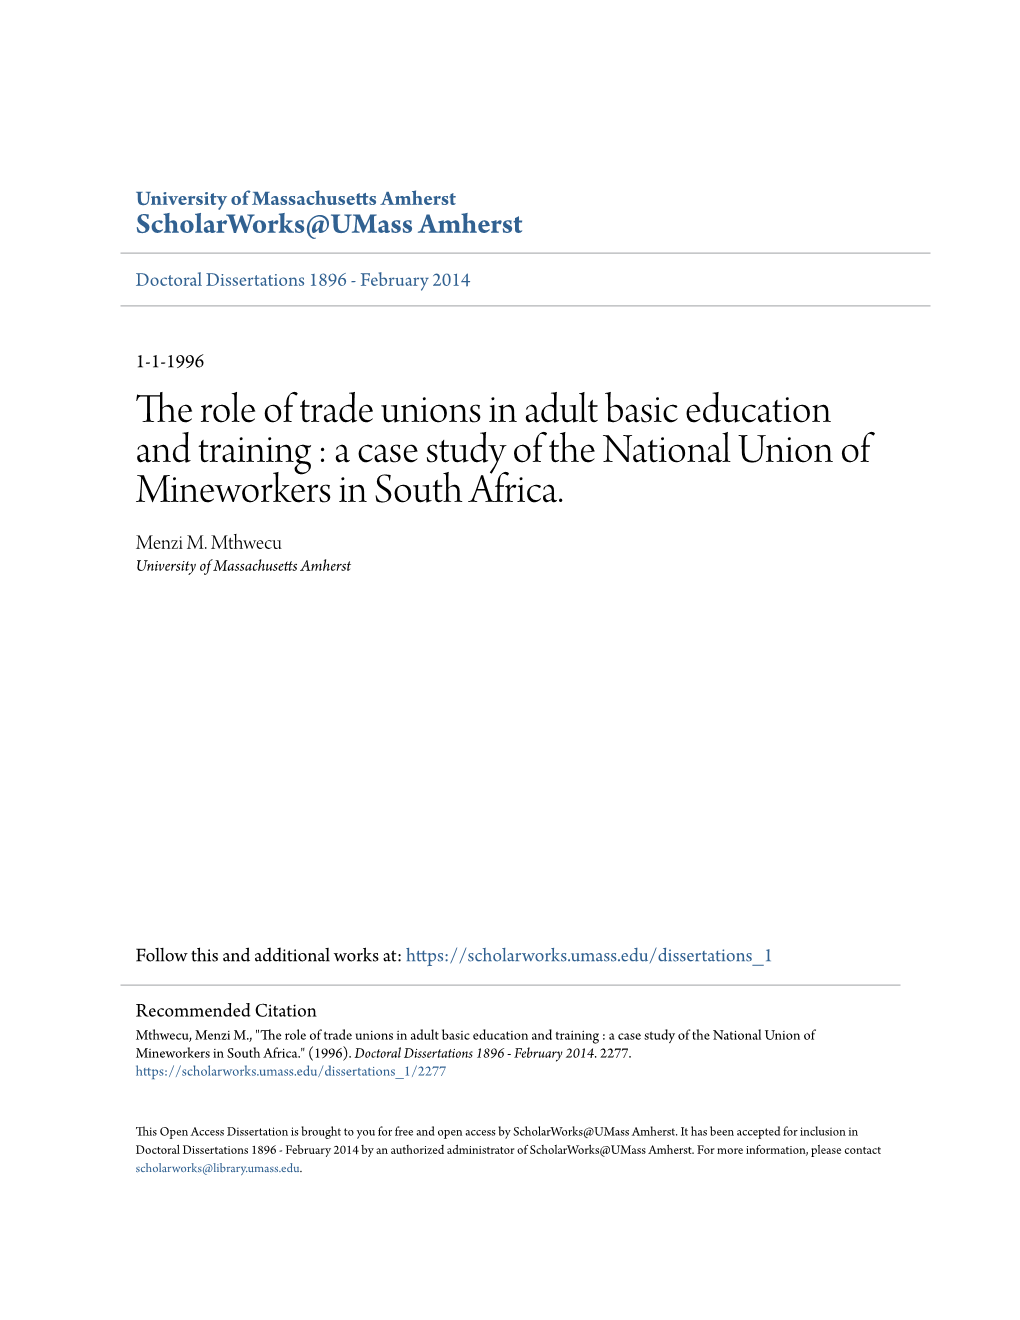 The Role of Trade Unions in Adult Basic Education and Training: a Case Study of the National Union of Mineworkers in South Africa